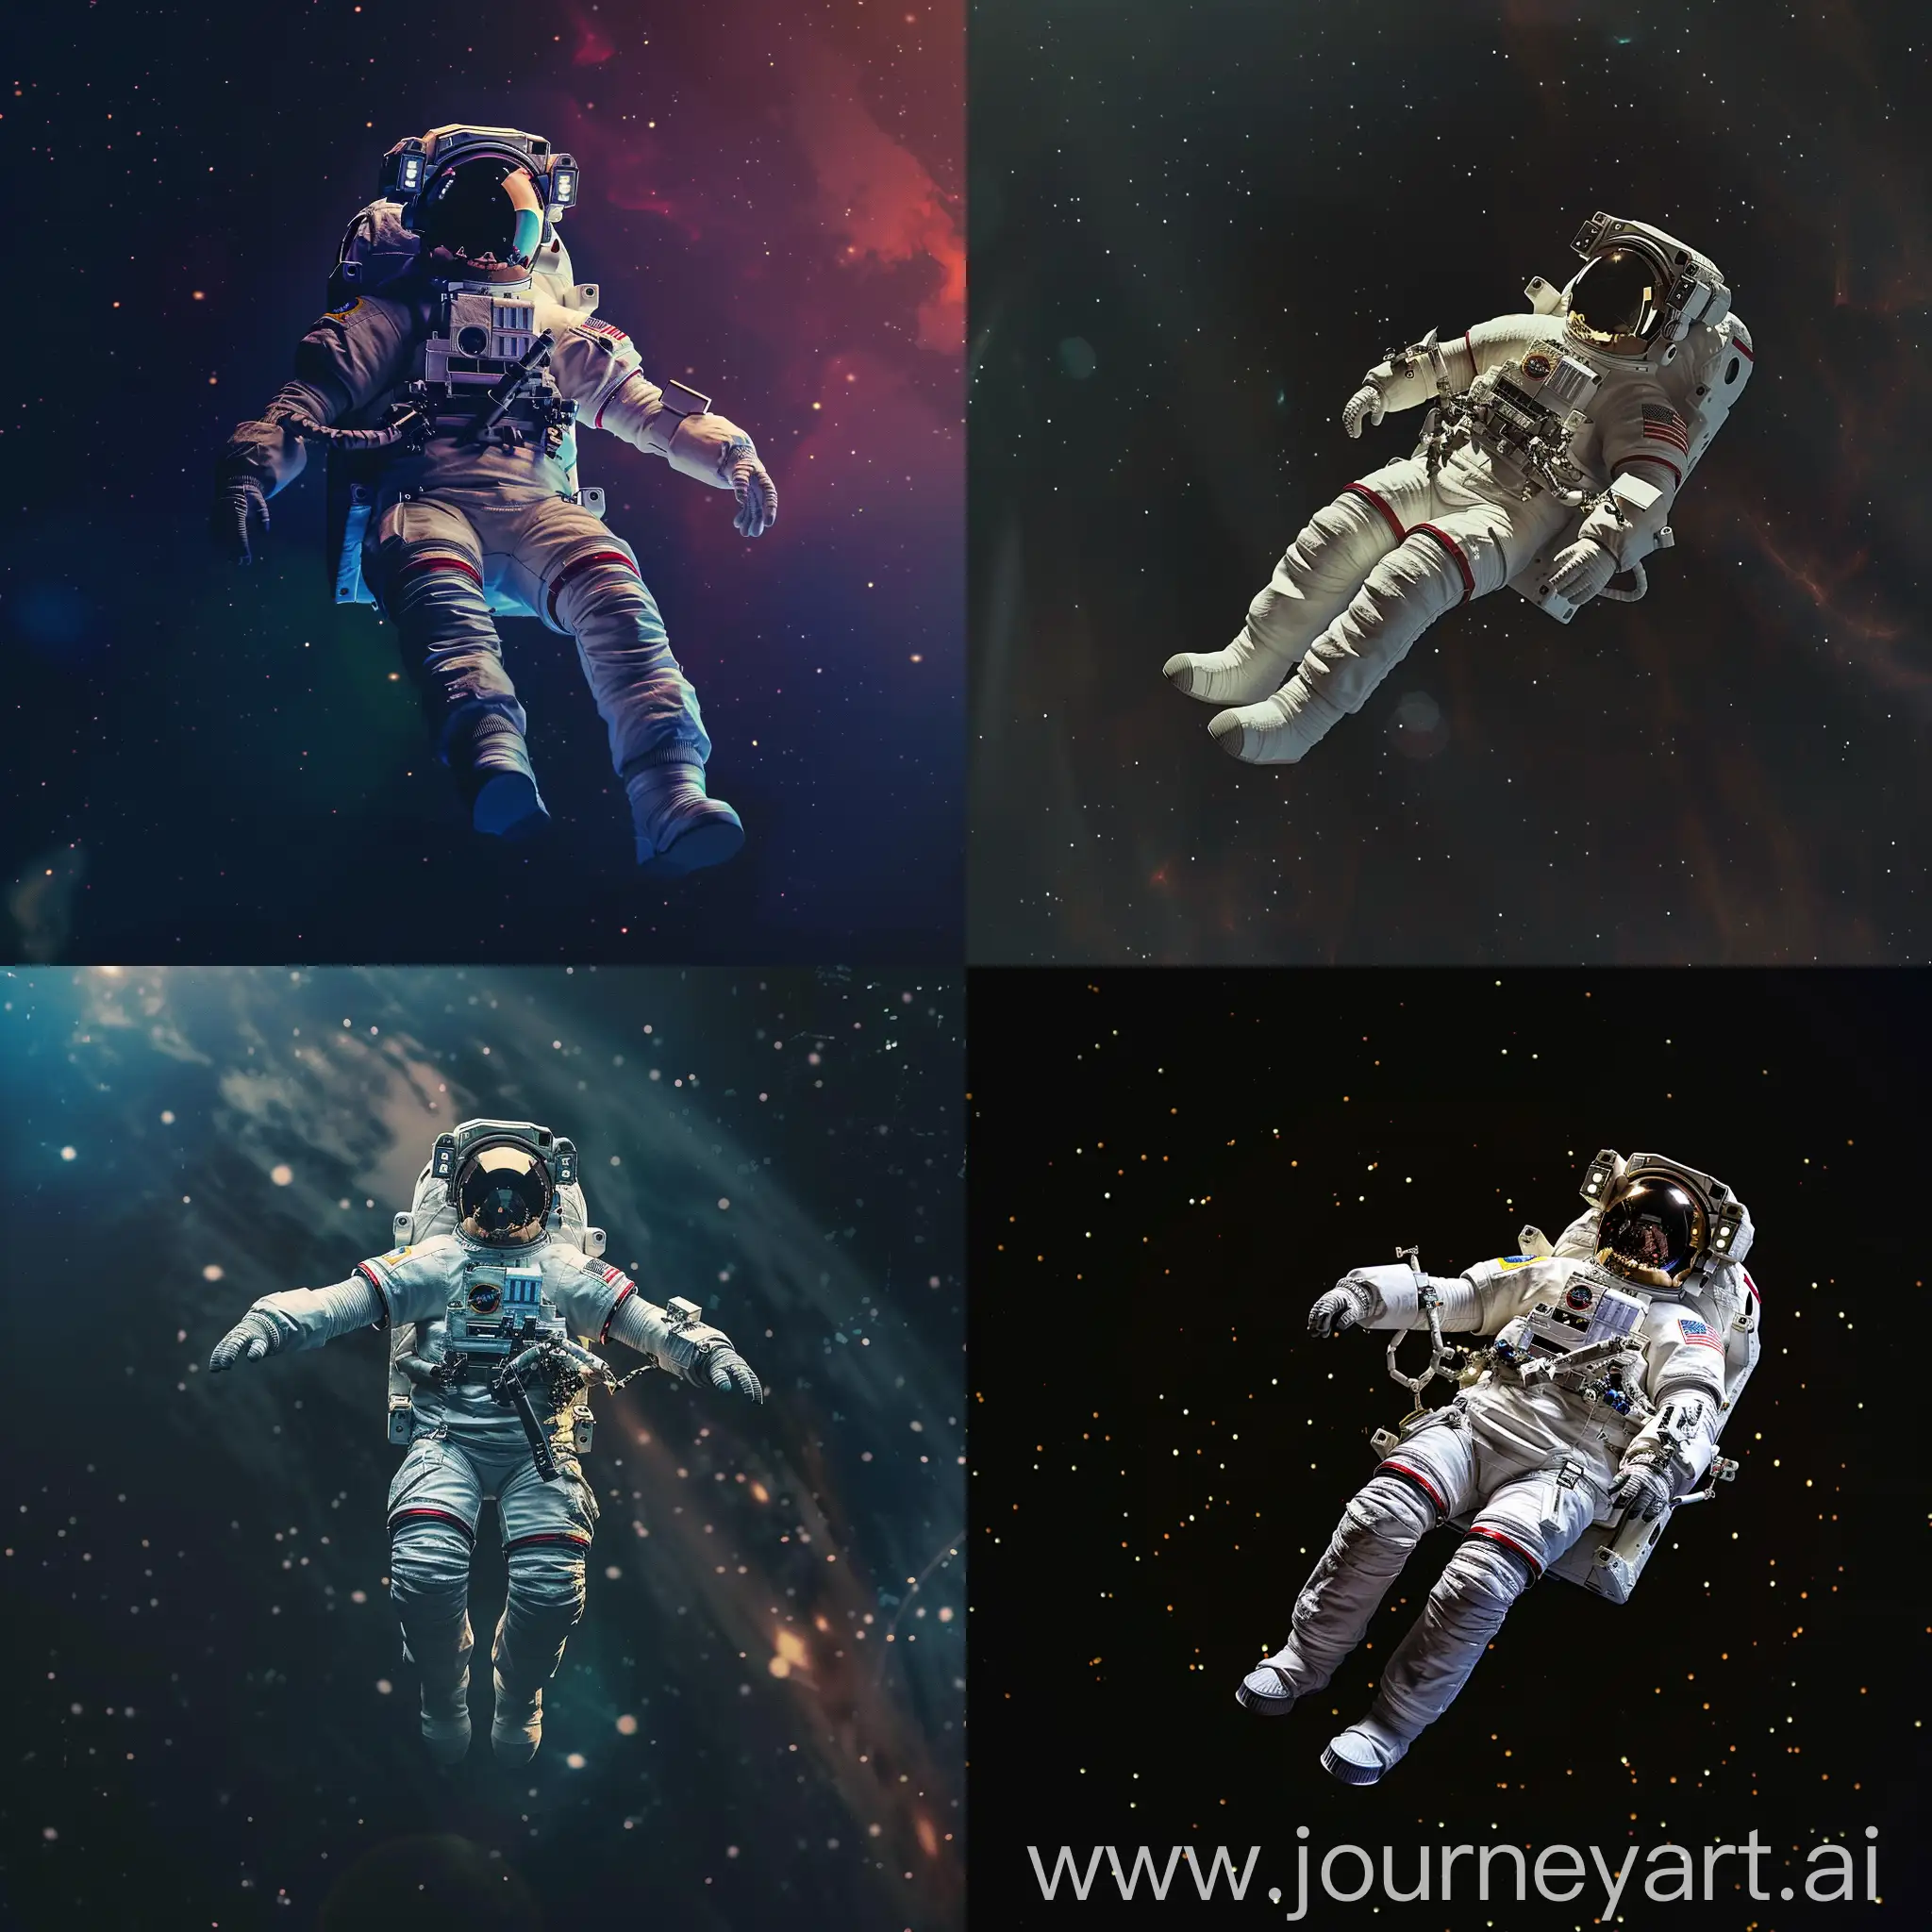 Astronaut in space floating